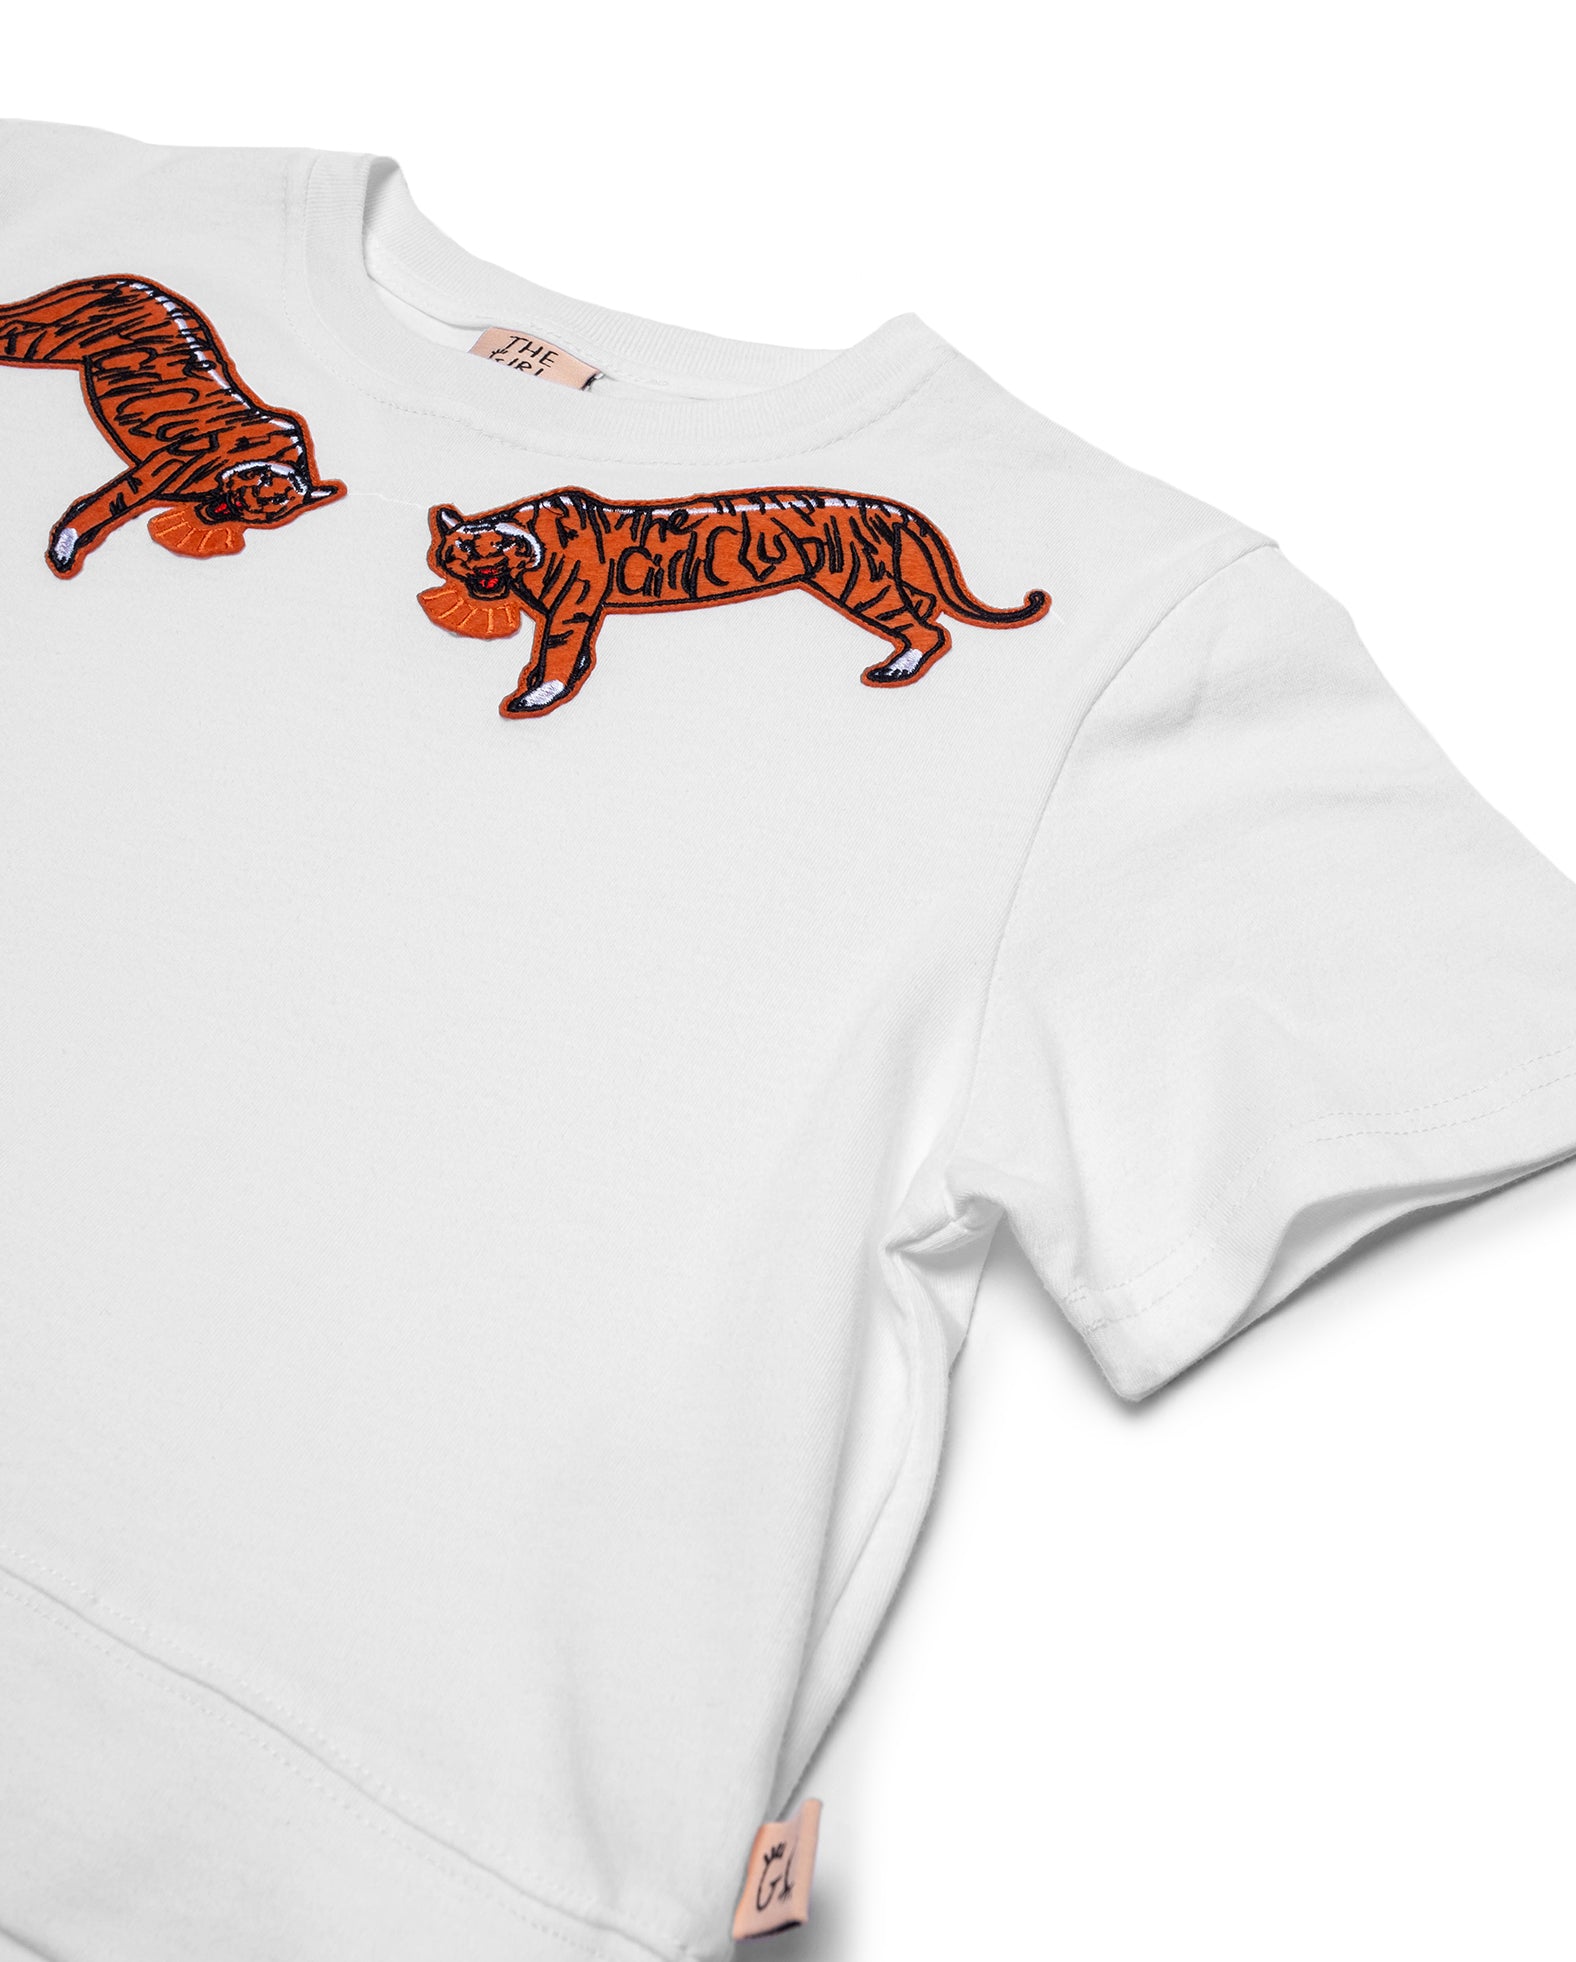 The Girl Club - Embroided Tiger Crop Tee